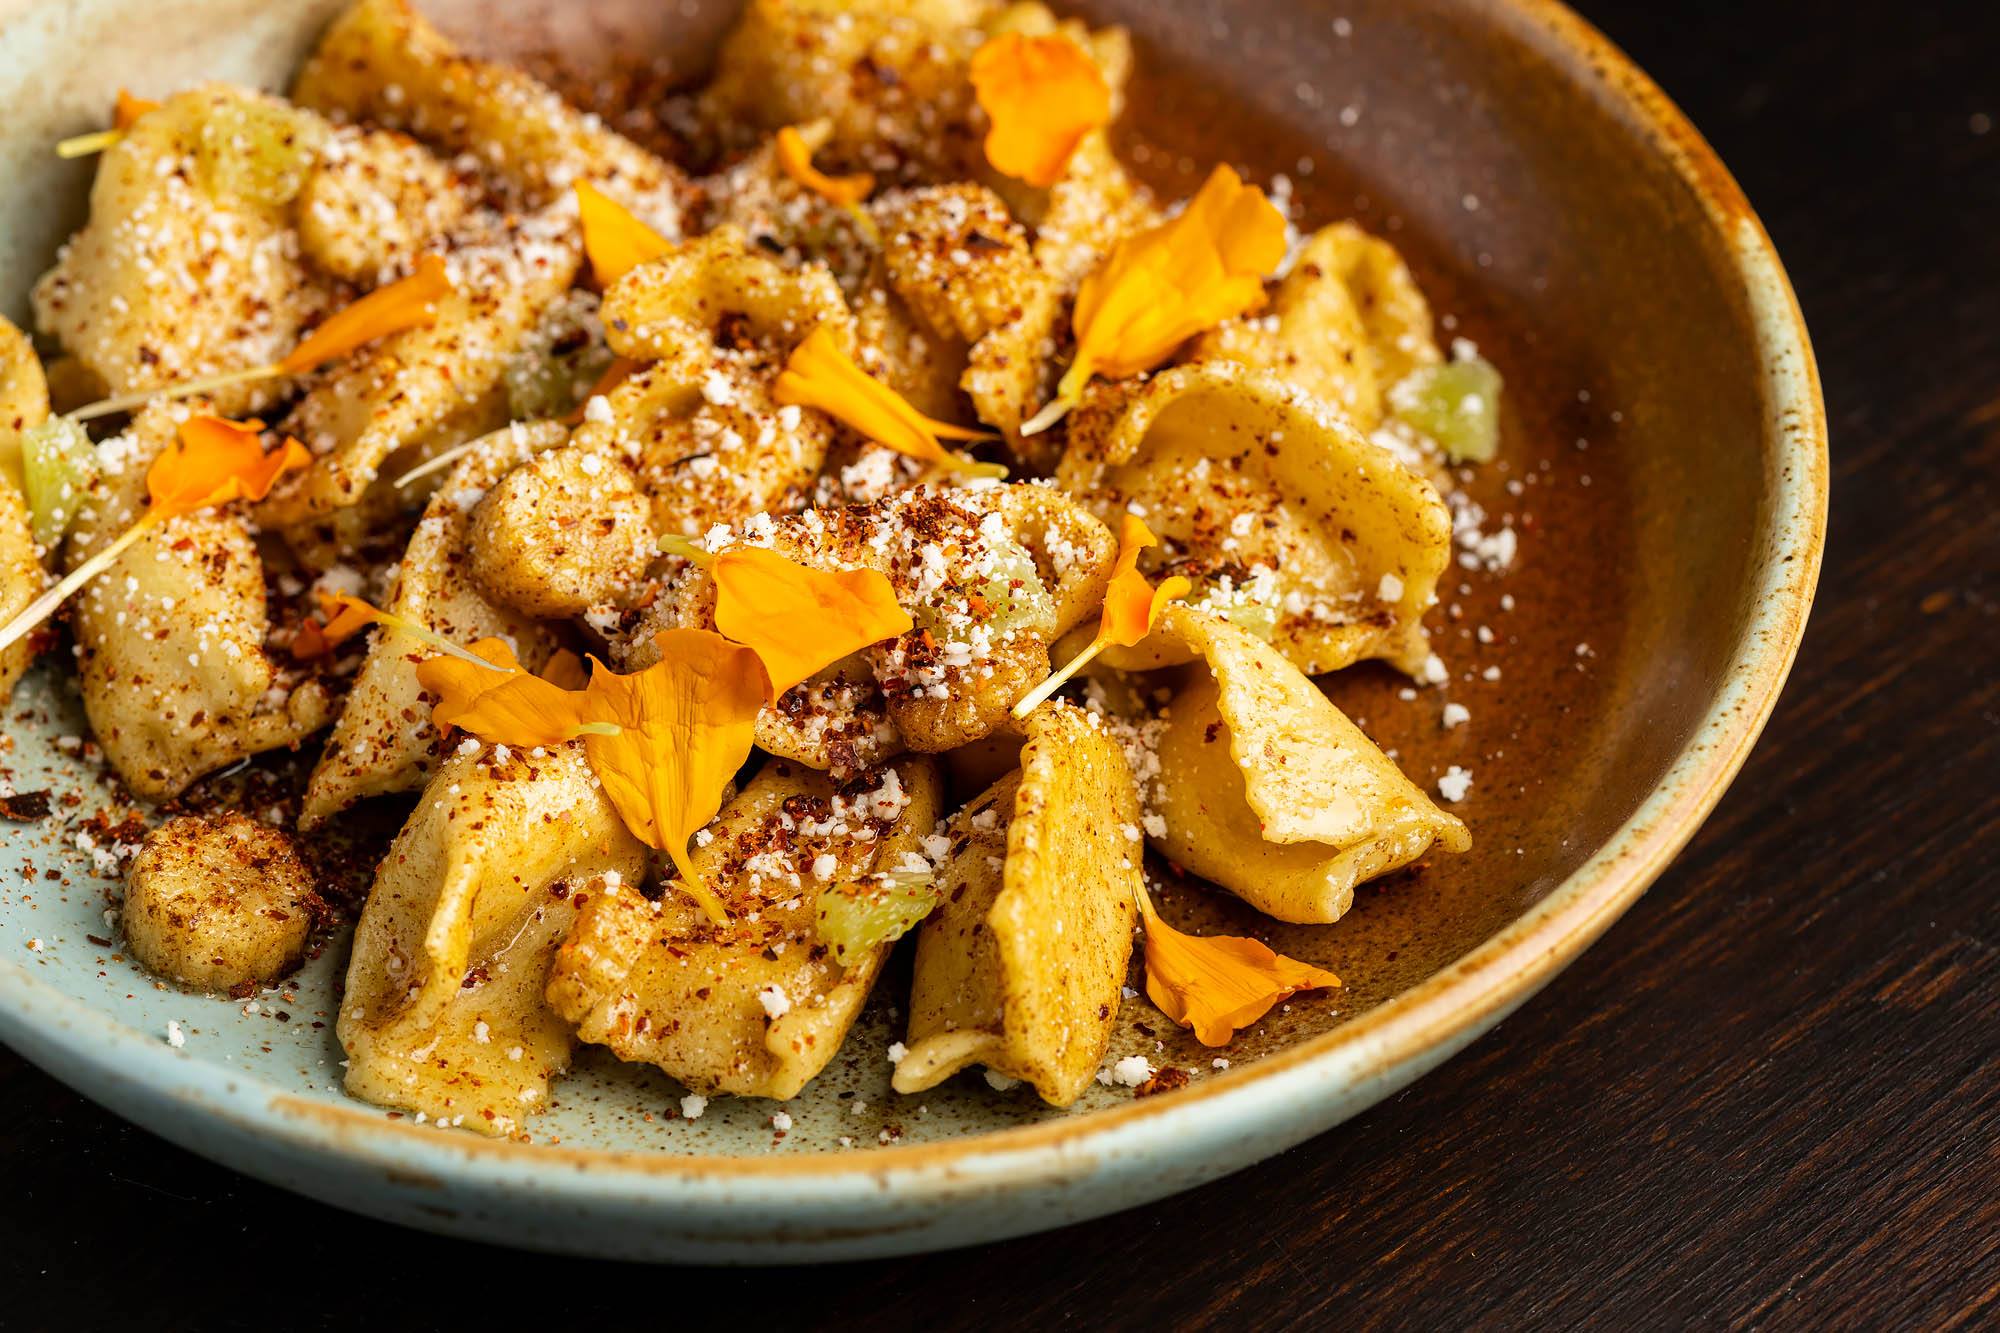 Yellow-orange stuffed pasta with edible flowers in a bowl at Amiga Amore.